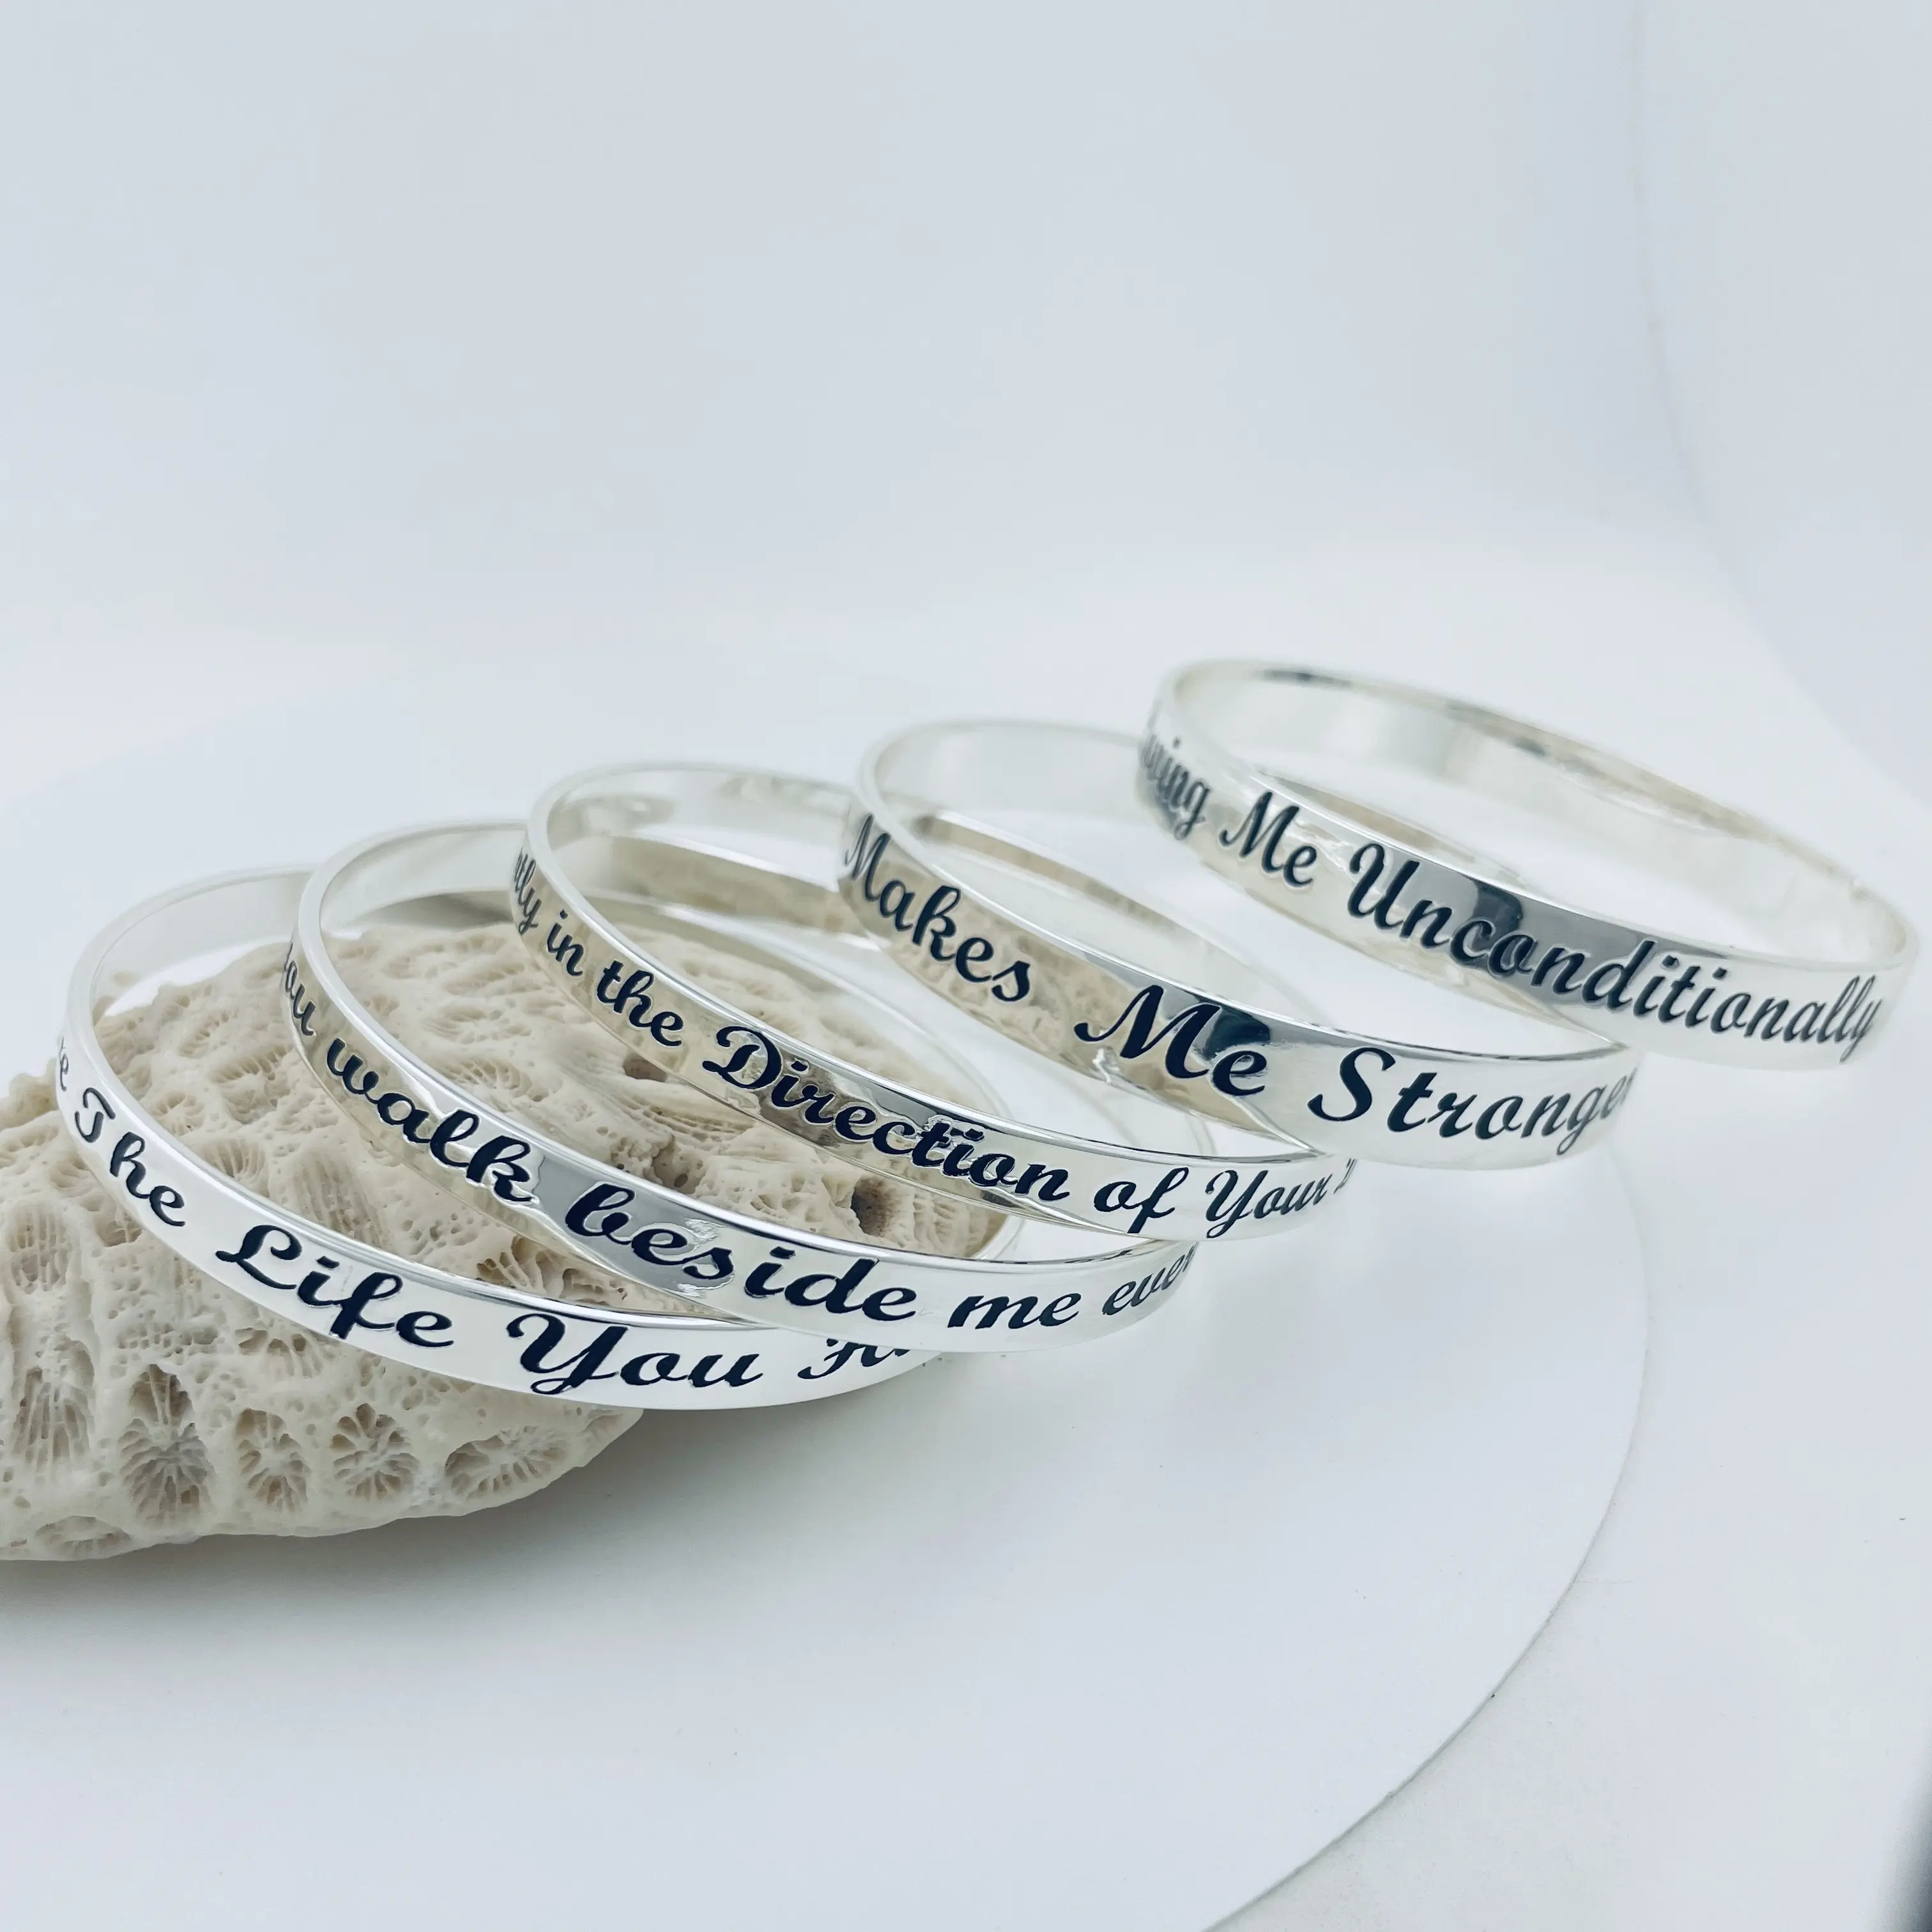 JX348 7mm 10mm Motivate bangle bracelet customize Motto Proverbs admonition any language icons all can be engraved jewelry gifts